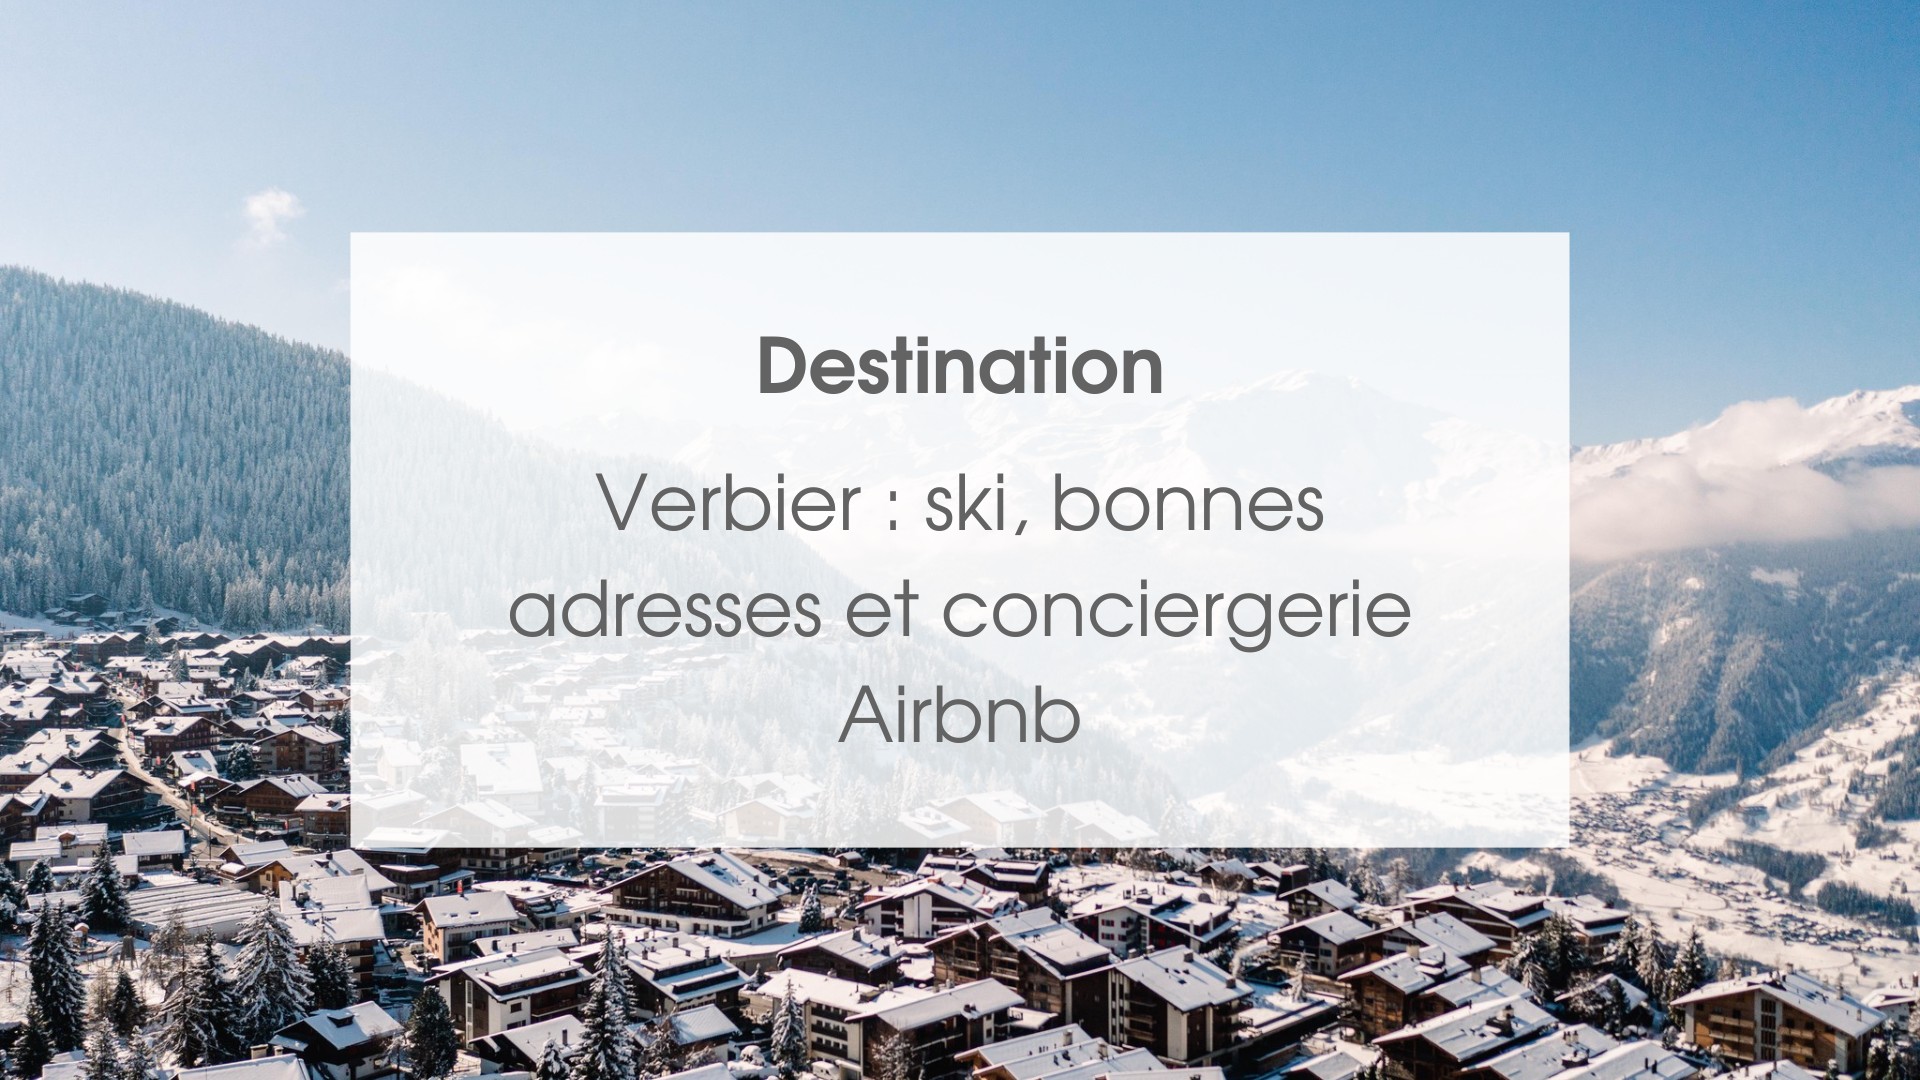 Verbier: skiing, good addresses and an Airbnb concierge service